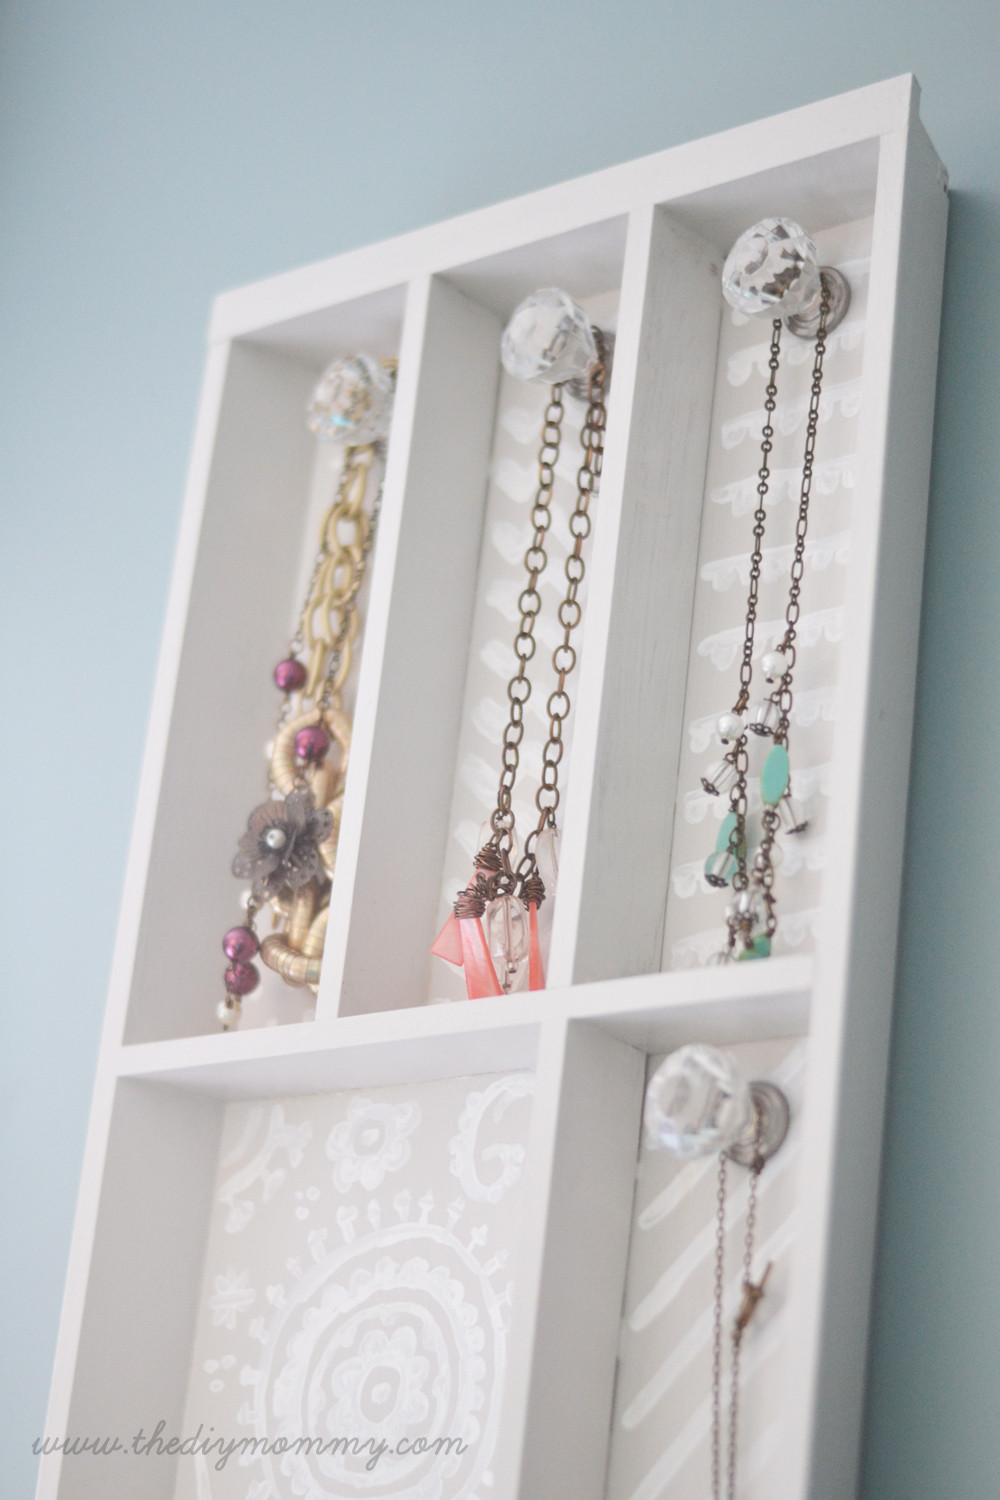 DIY Jewelry Rack
 Make a Jewelry Holder from a Cutlery Tray